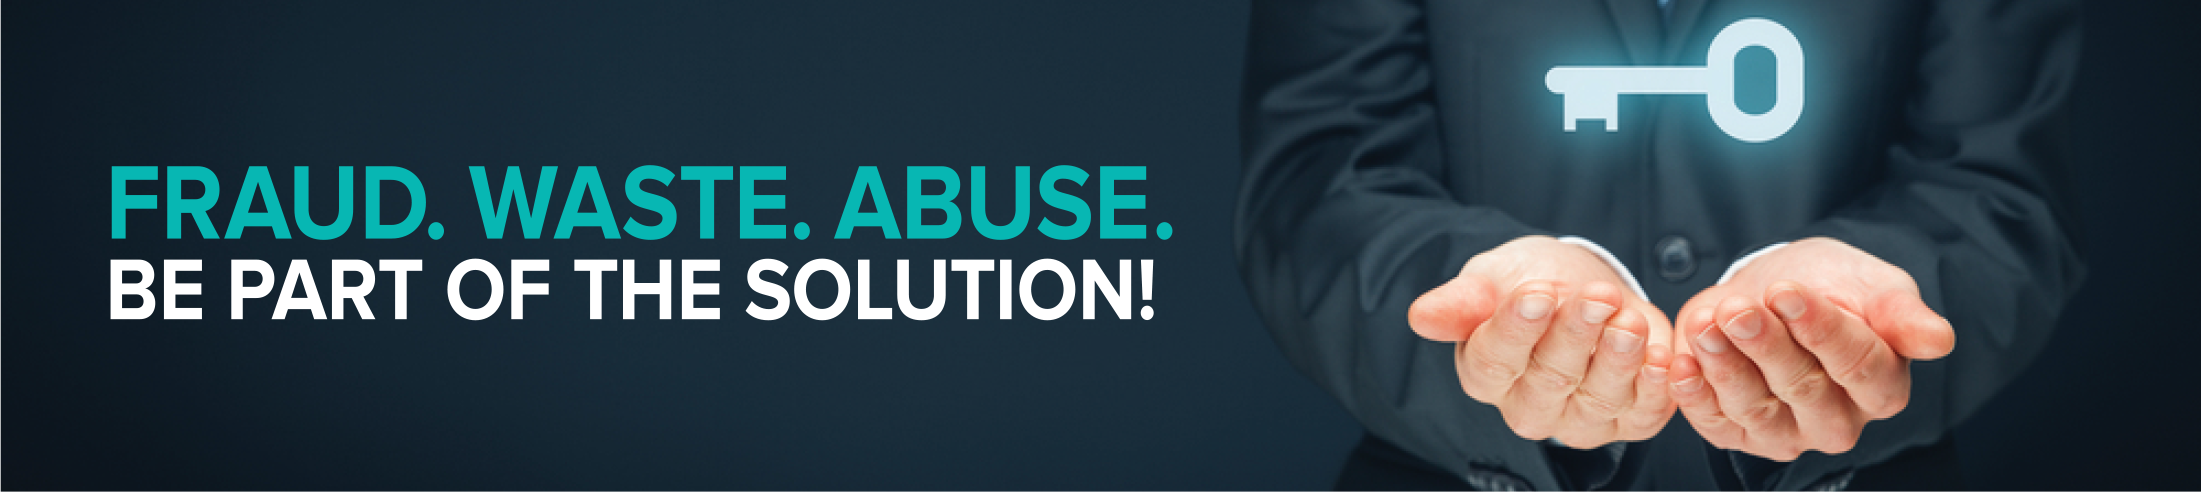 FRAUD. WASTE. ABUSE. BE PART OF THE SOLUTION!